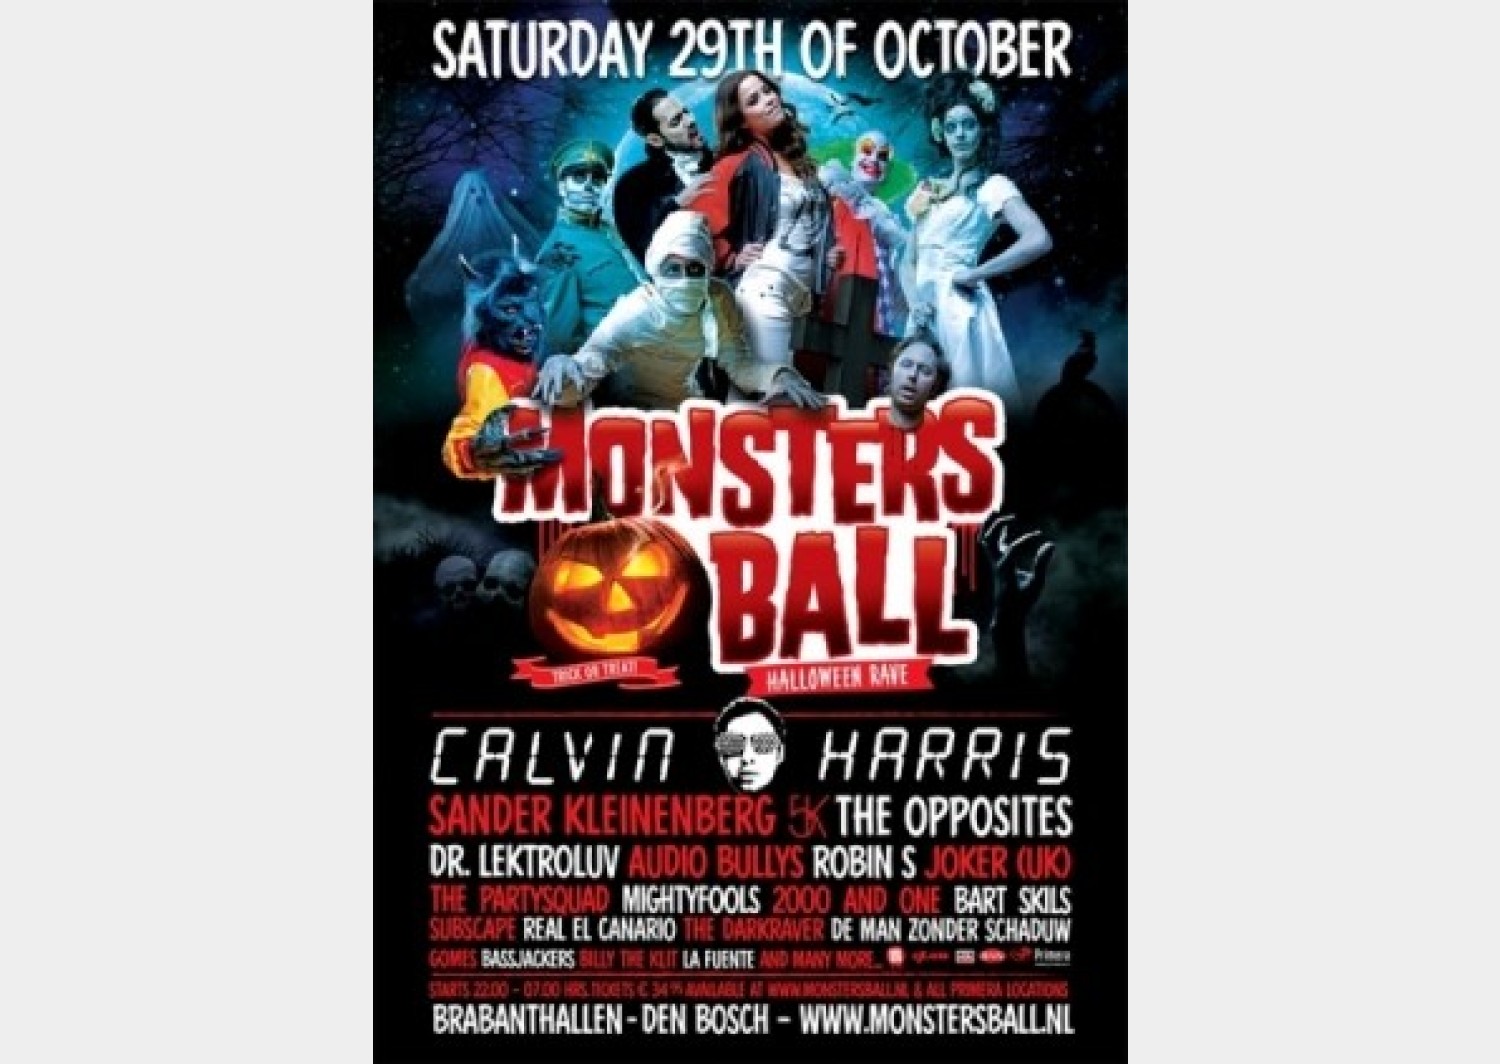 Party nieuws: Monsters Ball – Timetable en final info..